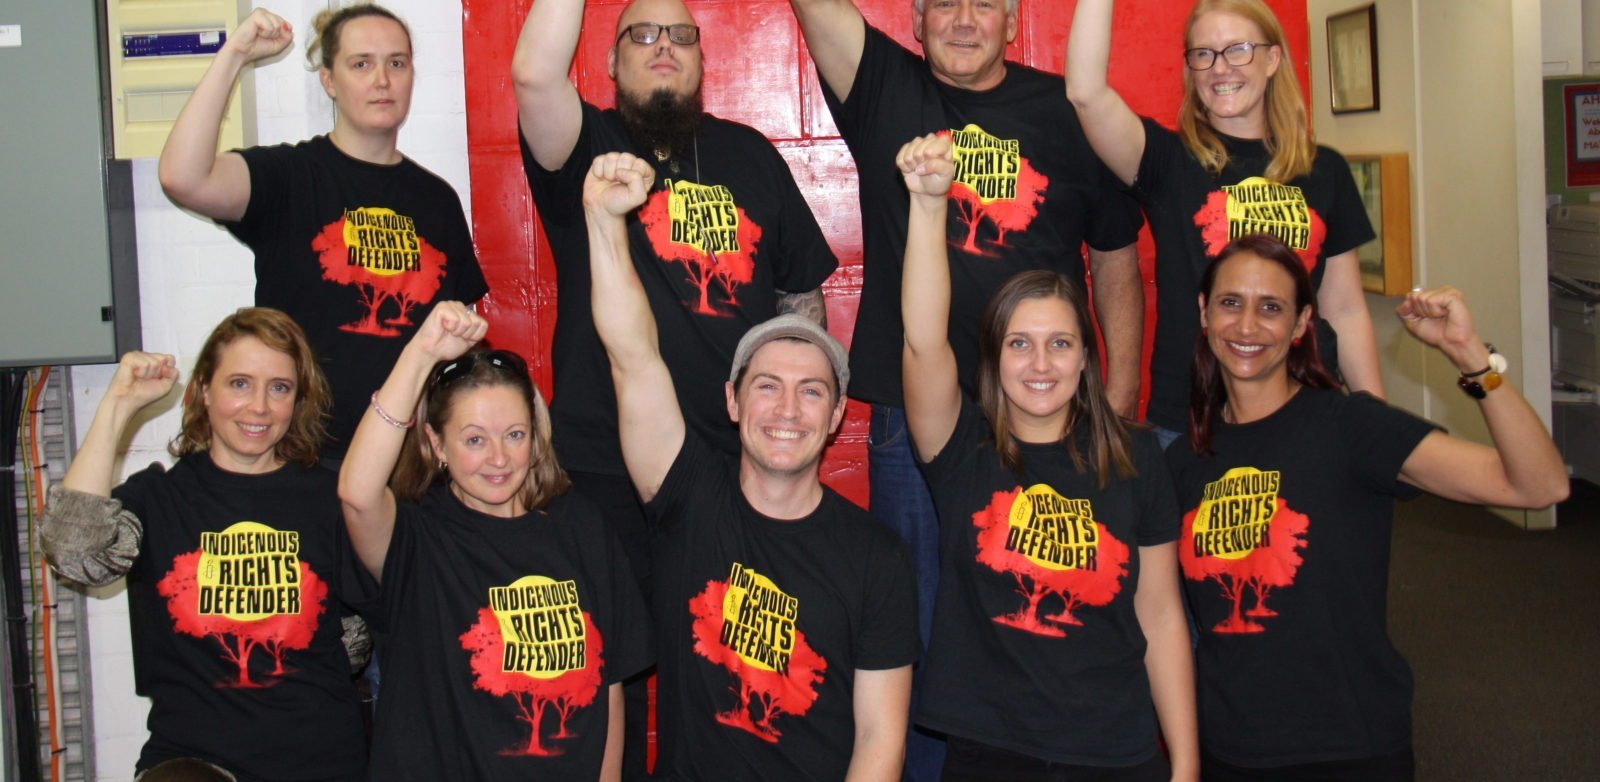 9 people with their fists held high with Indigenous Rights Defender on their t-shirts